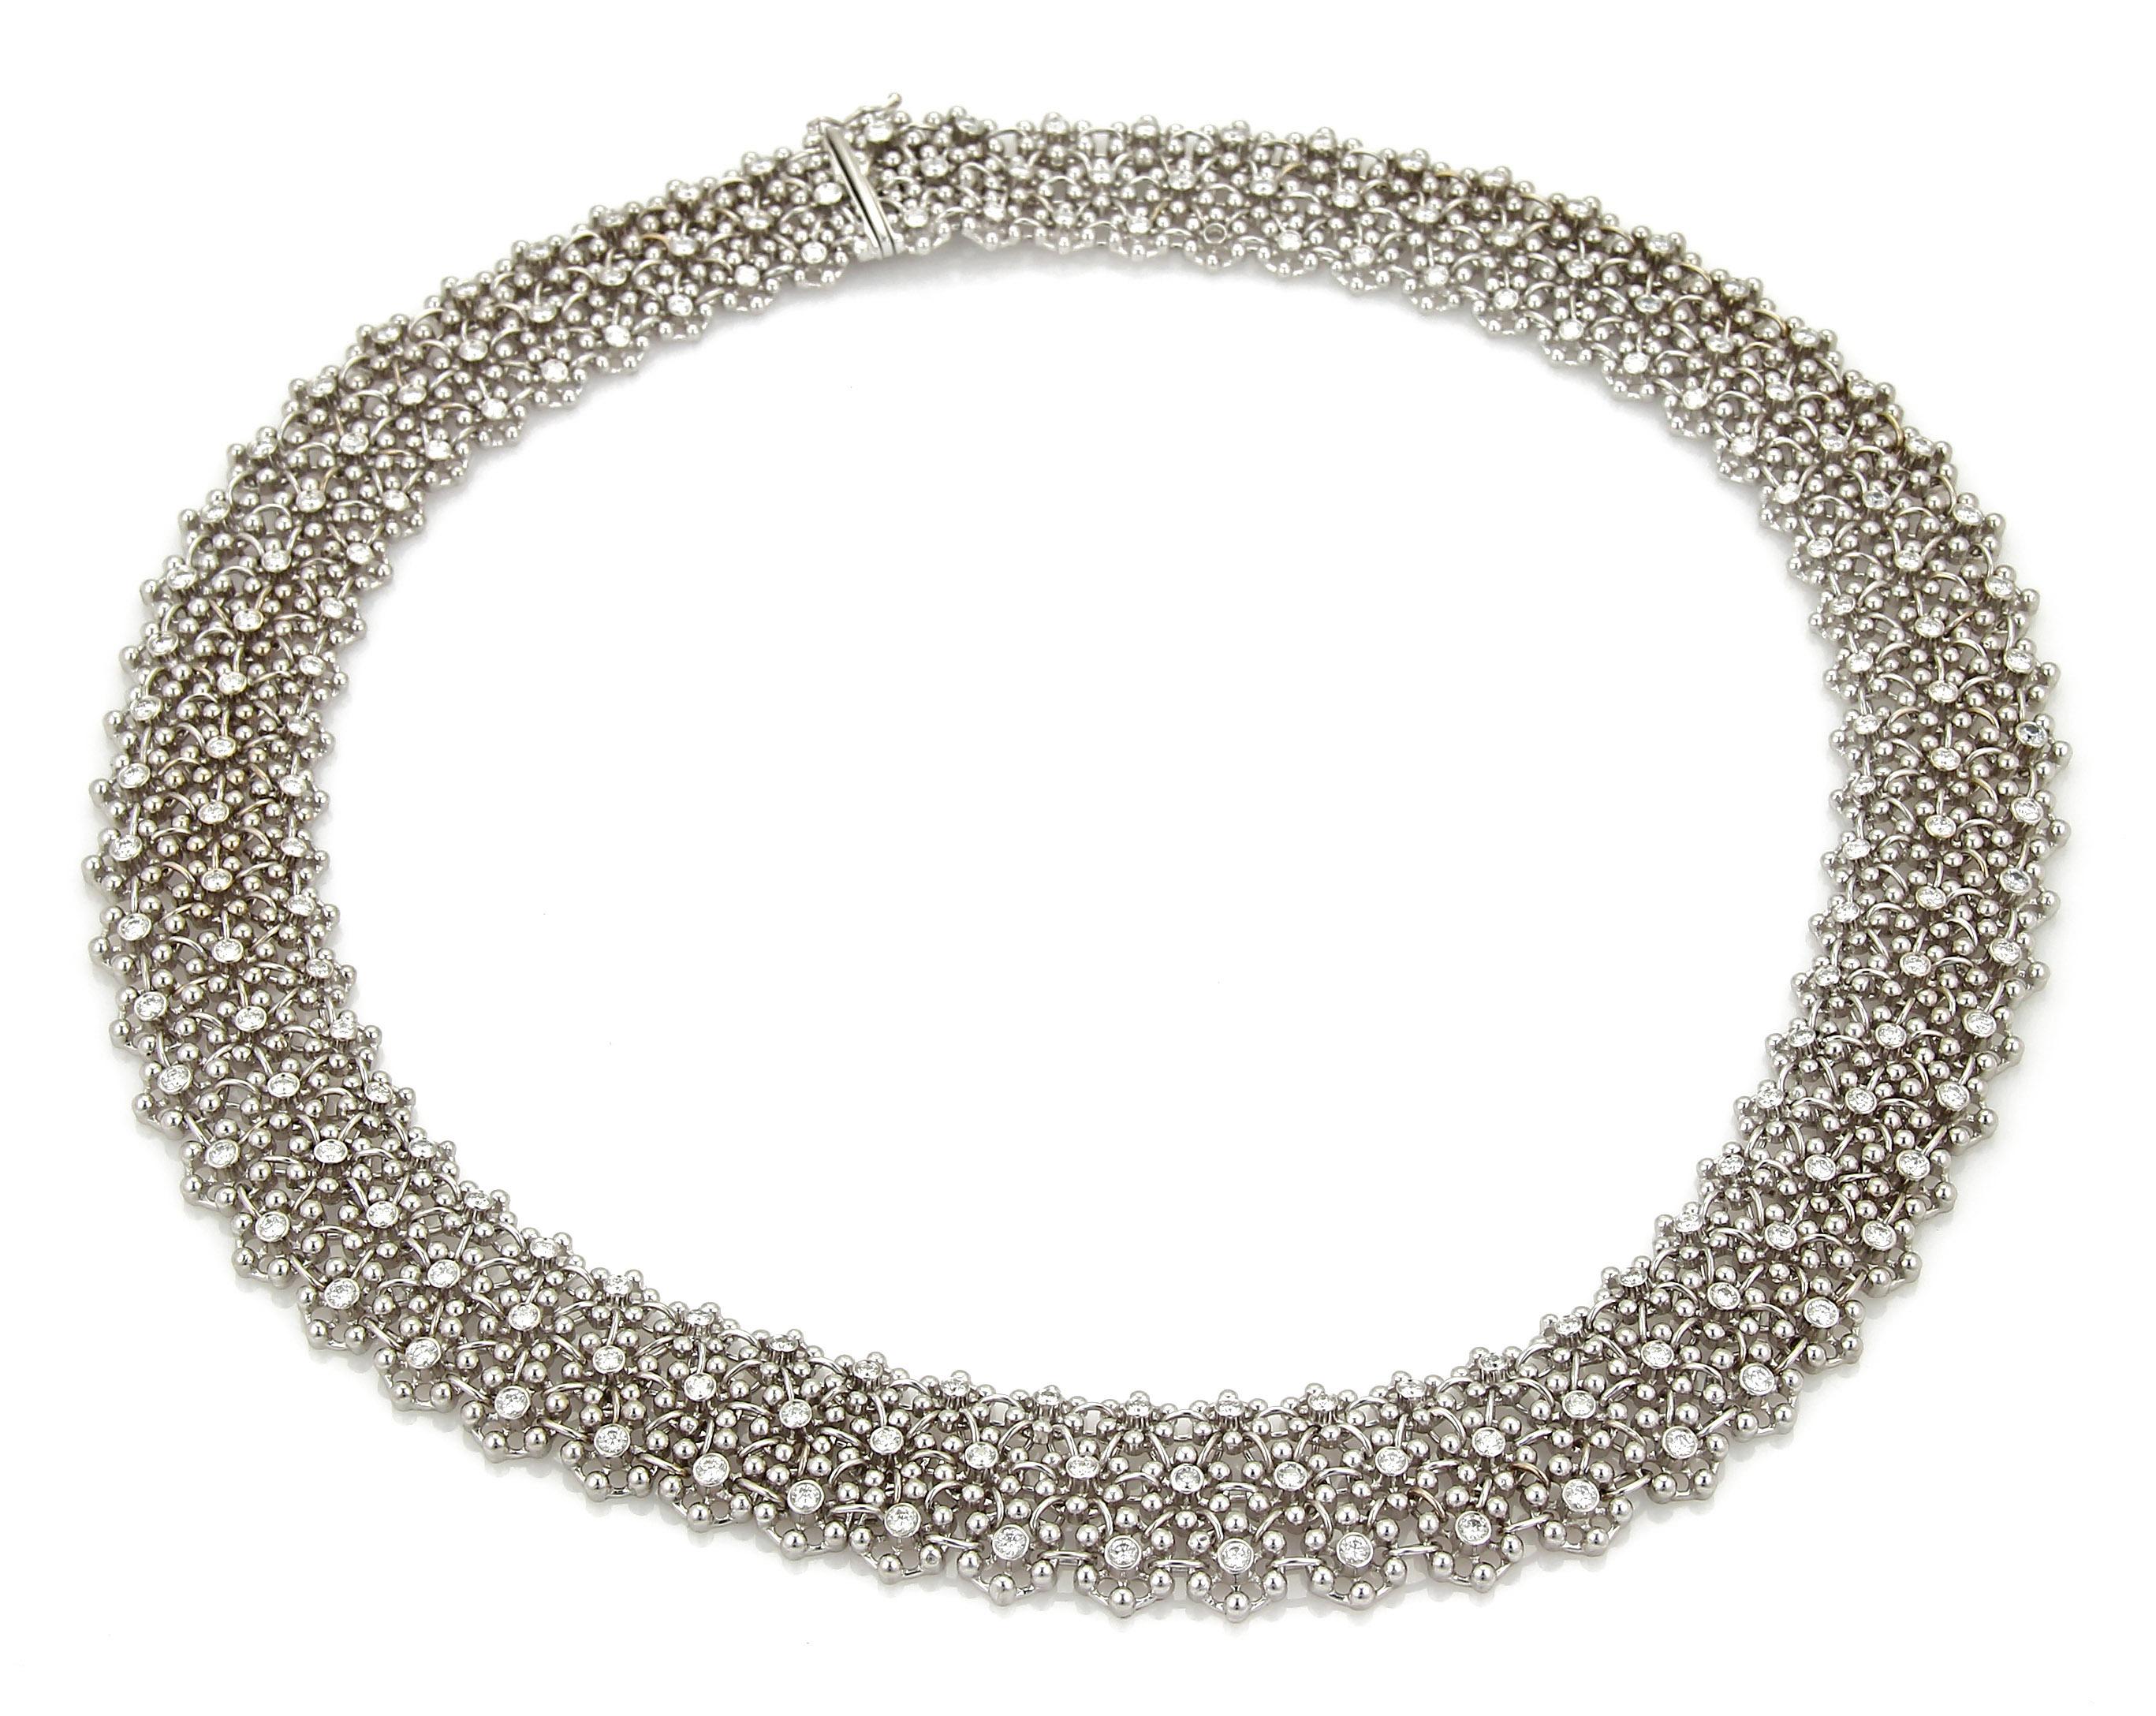 This is a stunning Estate lace design diamond necklace, it is crafted from 18k white gold with a fine polished finish. This amazing celebrity piece has rows of small beaded flowers joined together with a oval link creating a soft flexibility, the